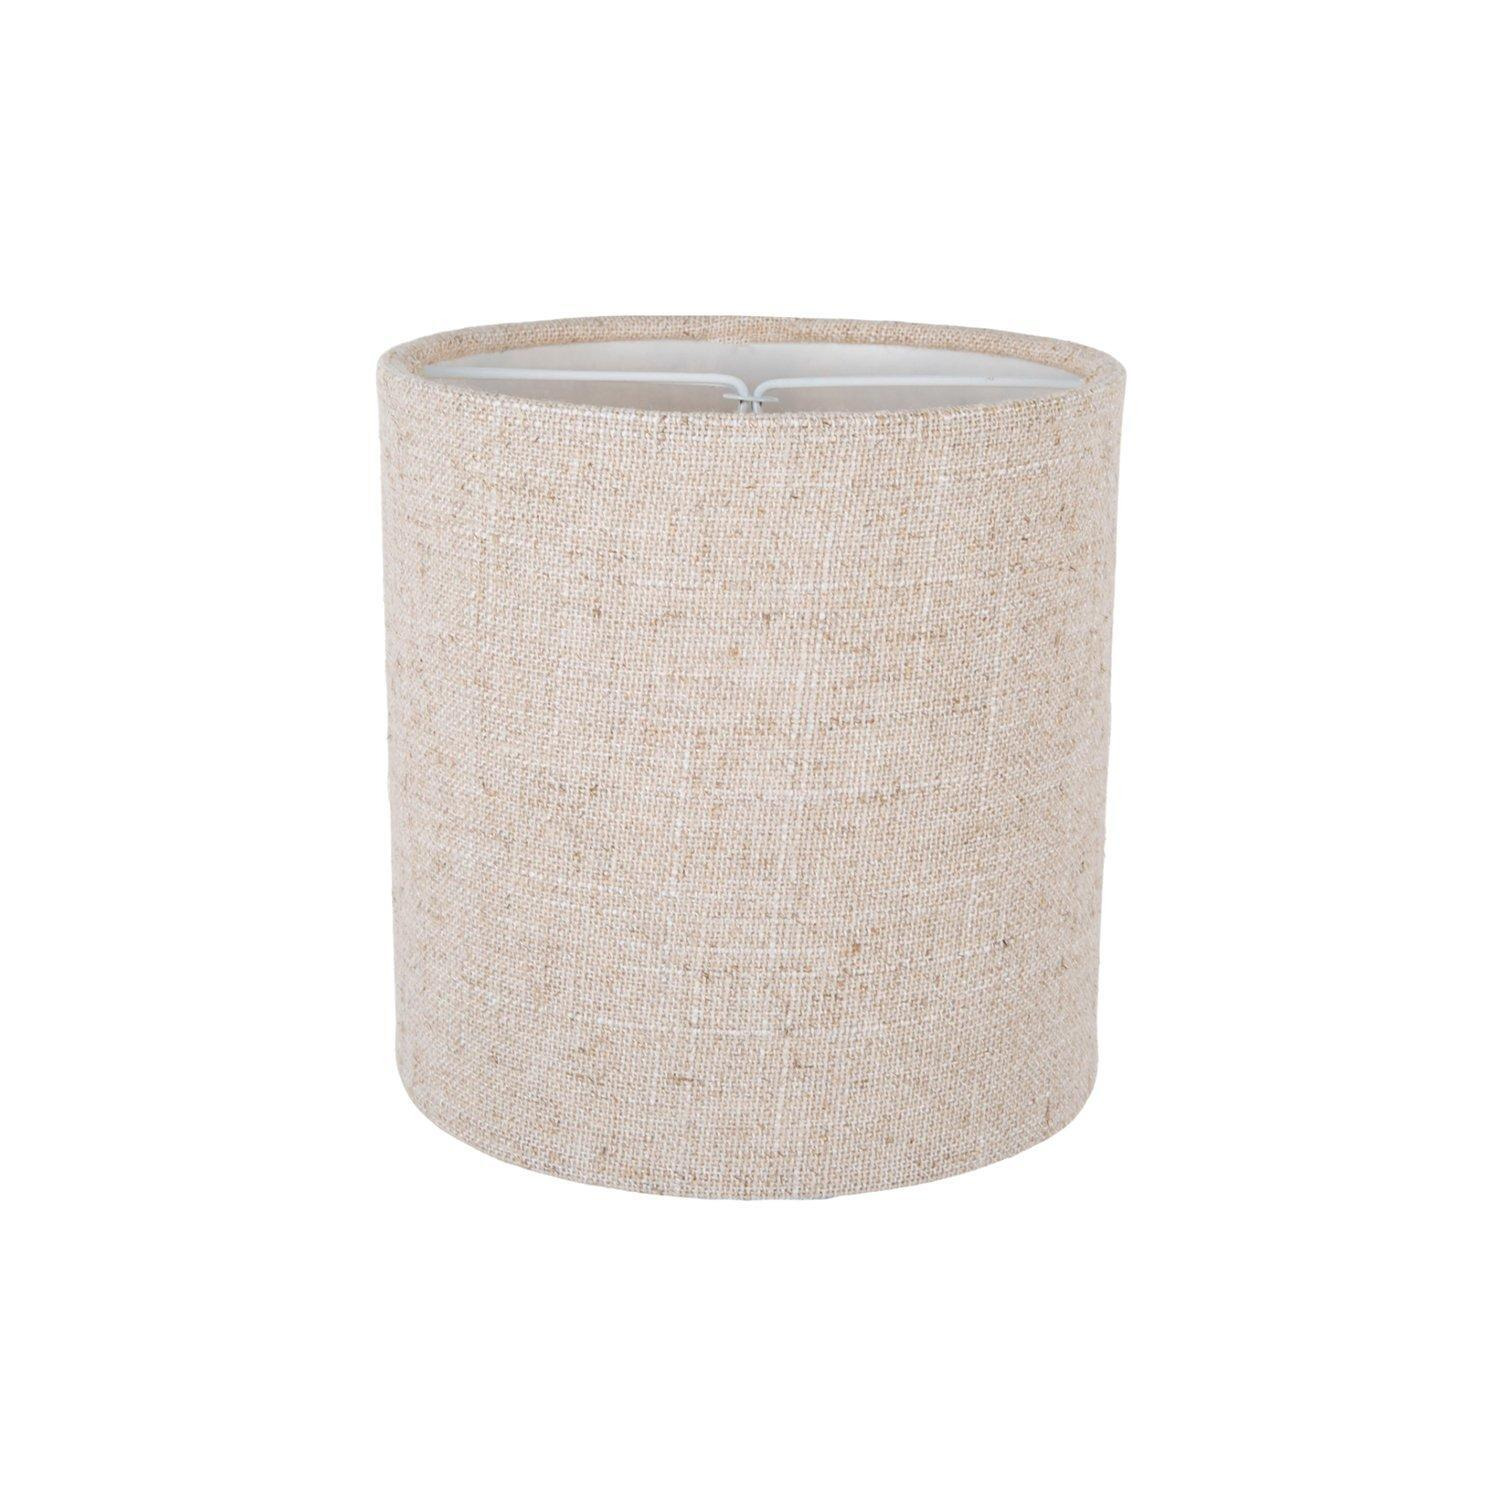 Small Round Drum Oatmeal Linen Fabric Shade - image 1